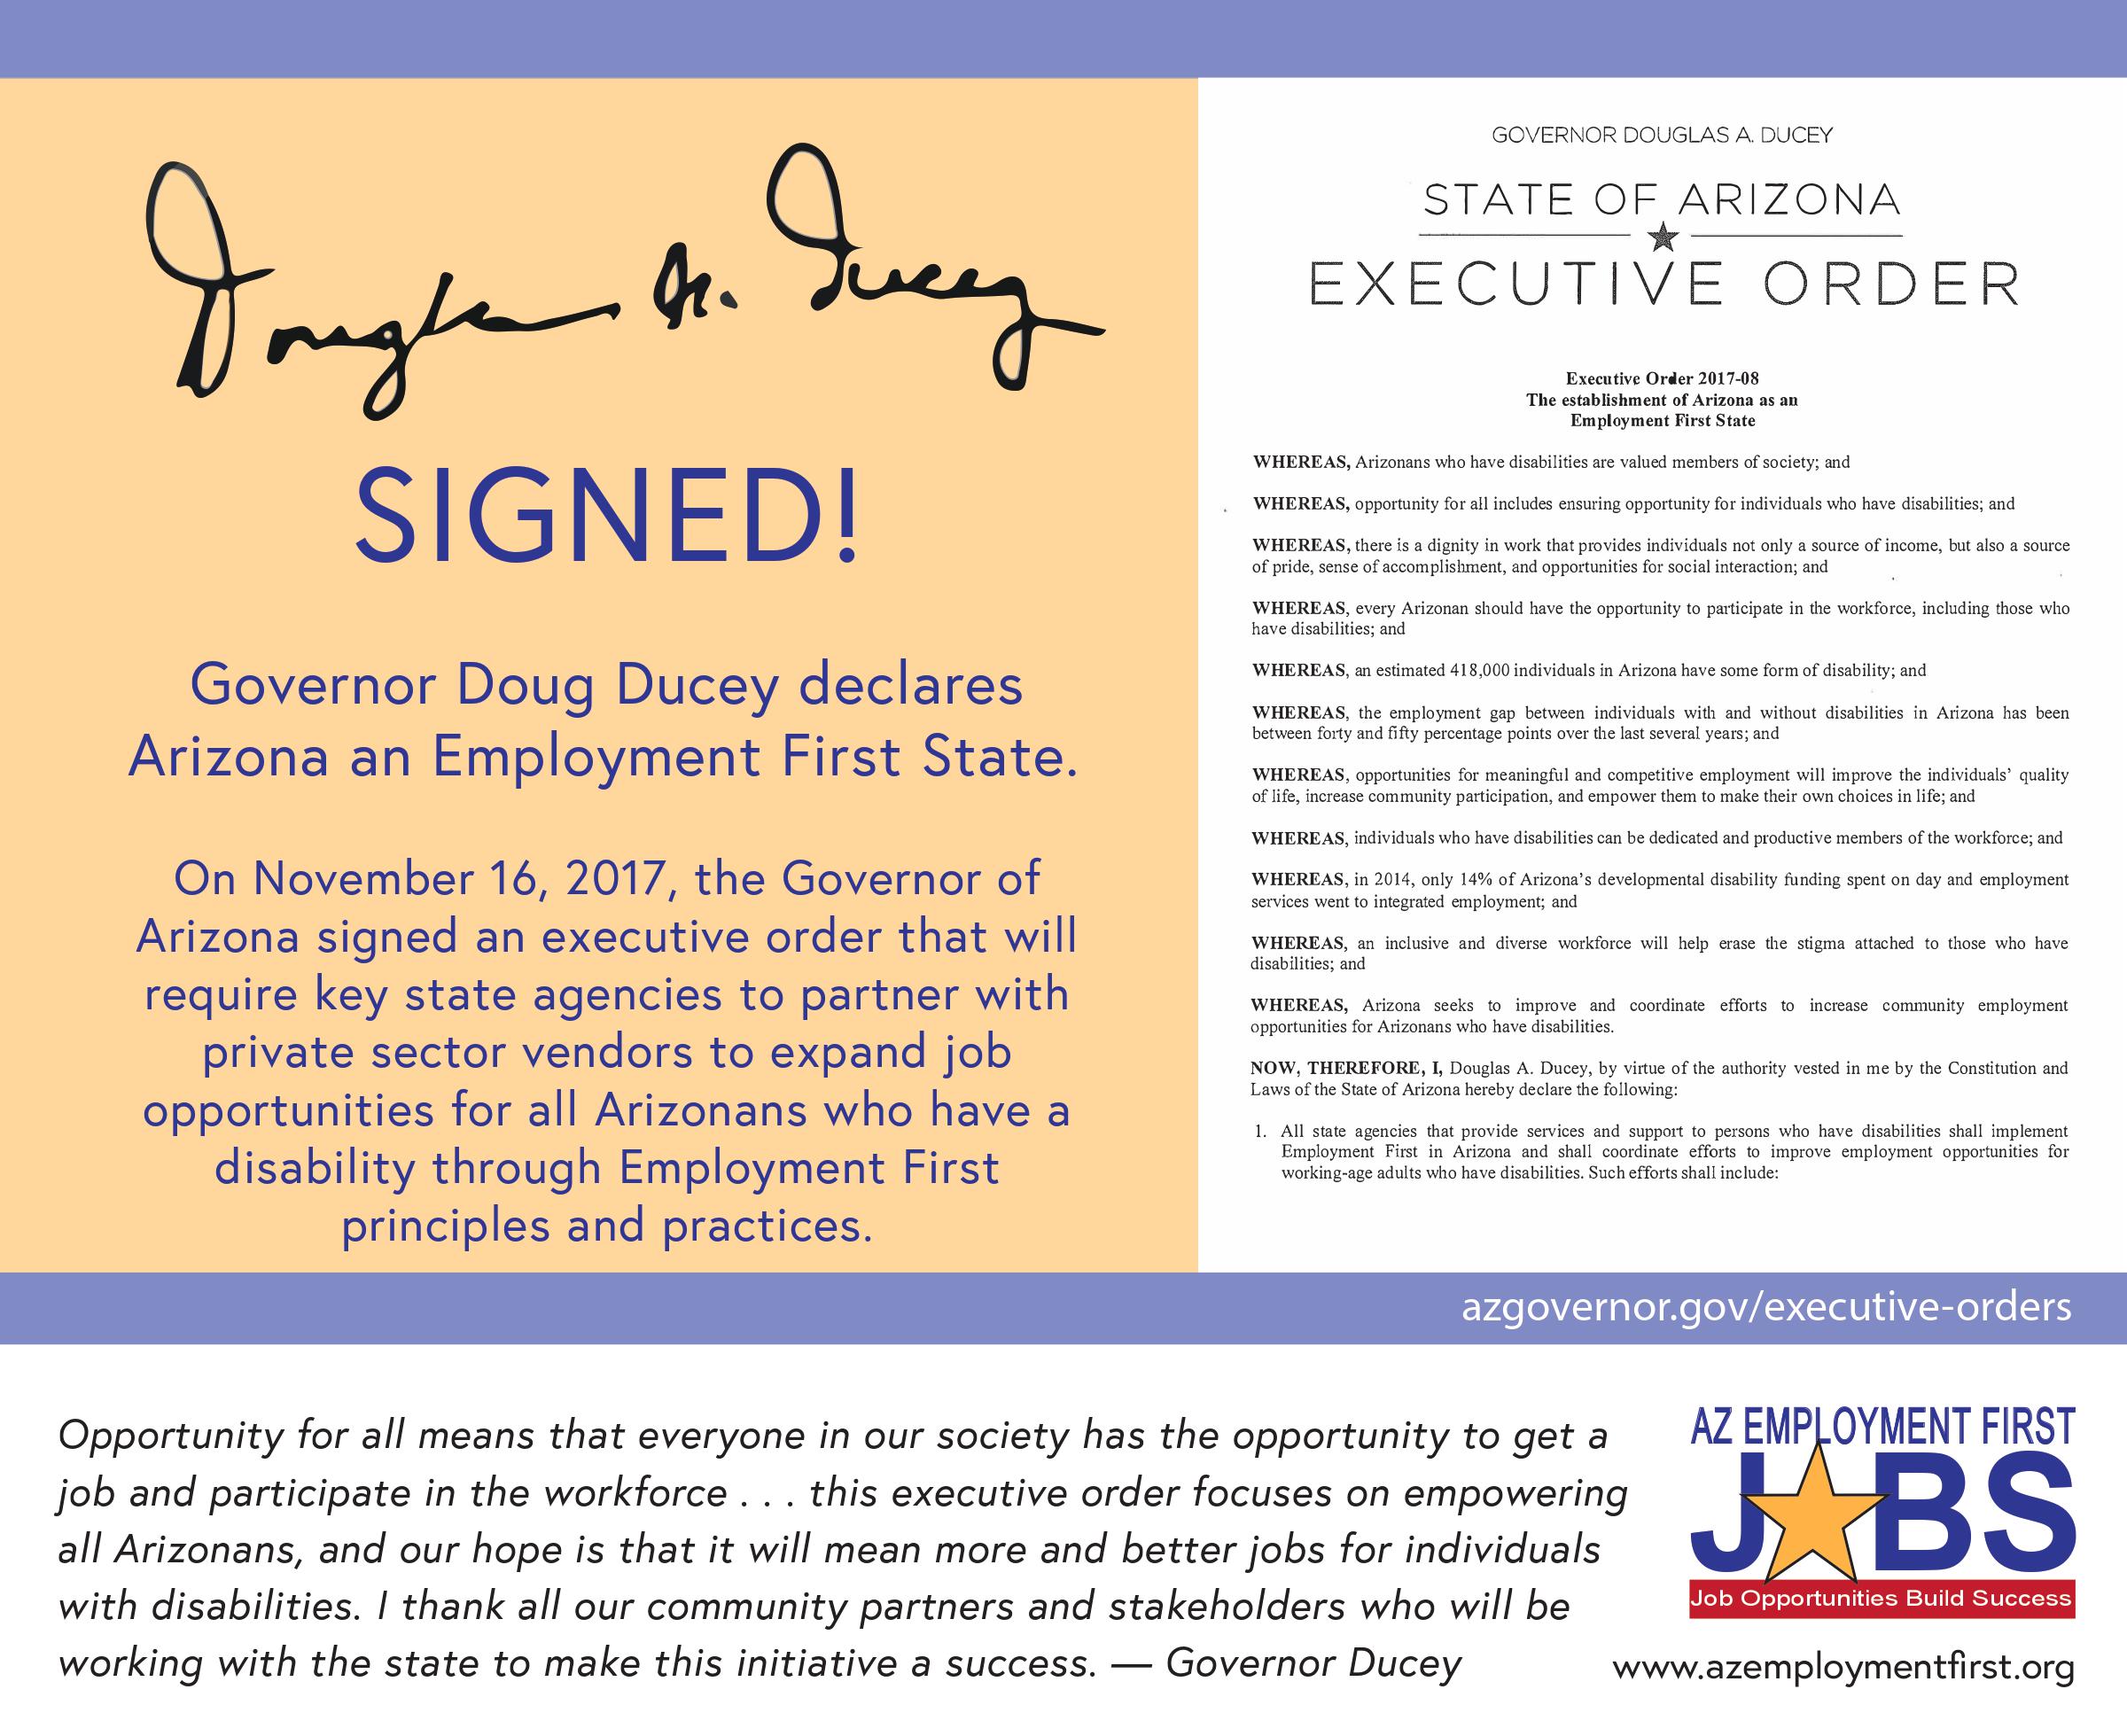 Image of Executive Order with Signature